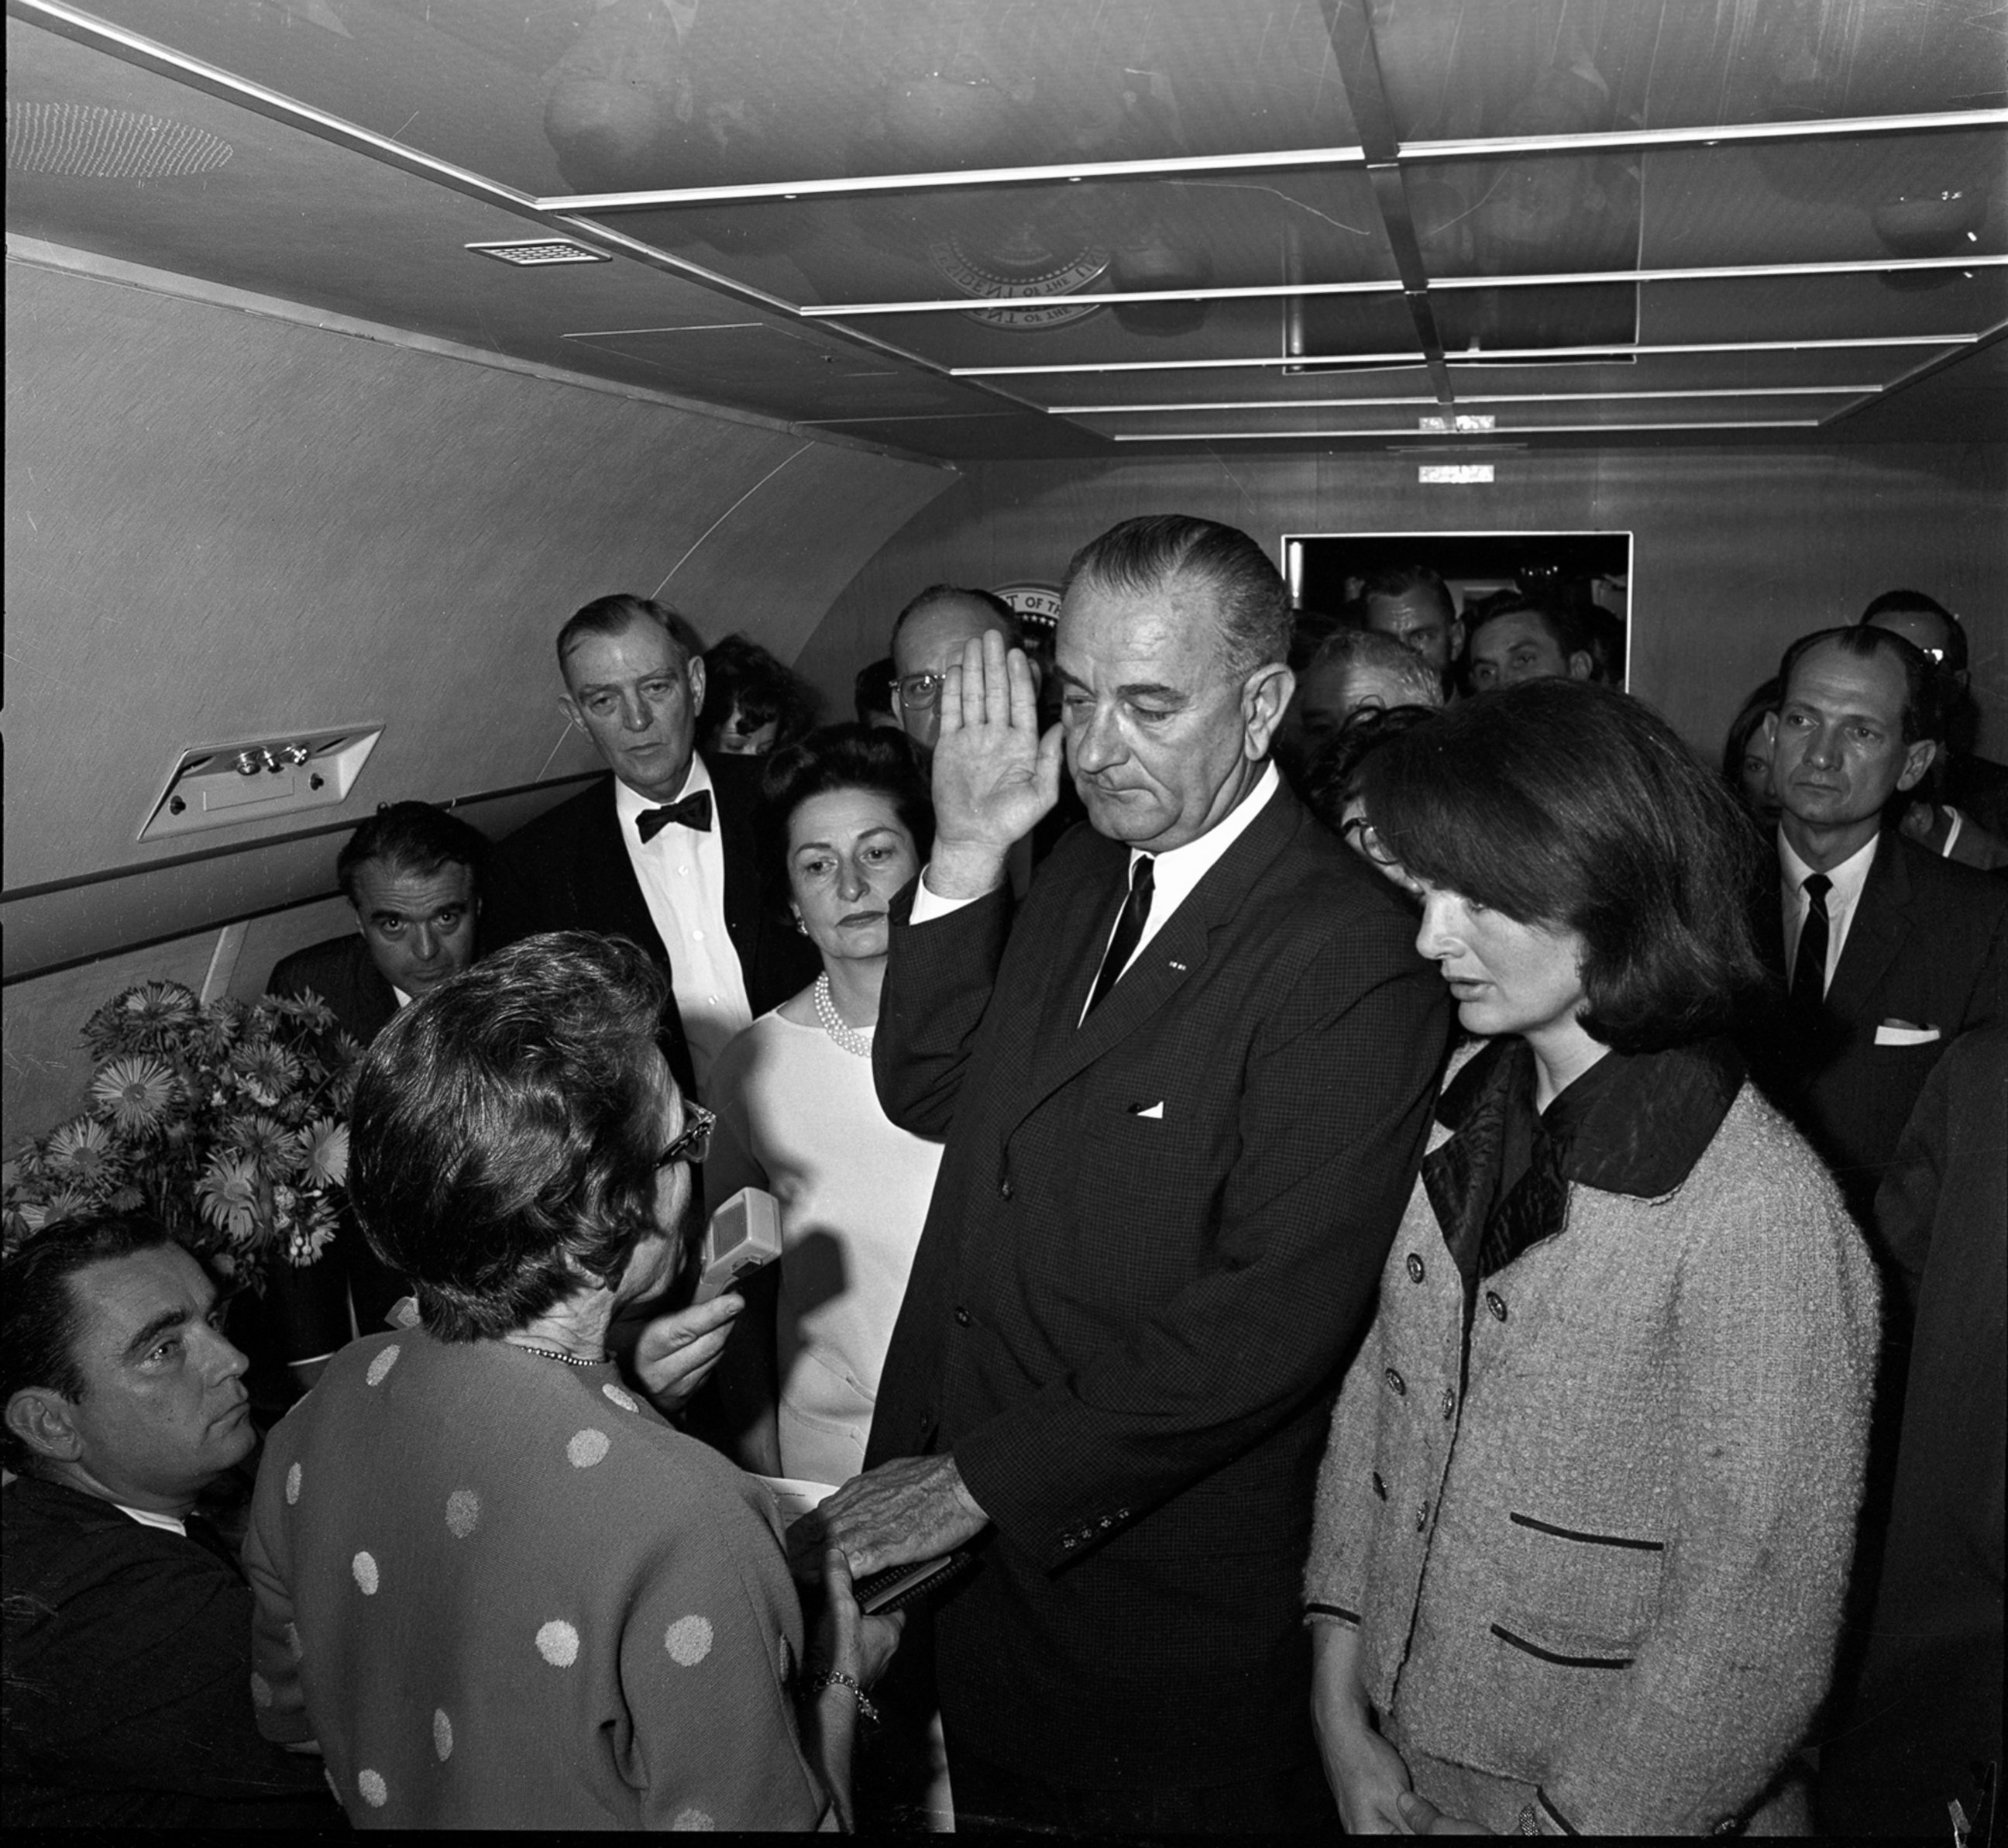 PHOTO: Vice-President Lyndon B. Johnson takes the oath of office to become the 36th President of the United States as he is sworn in on Air Force One after the assassination of John F. Kennedy, Nov. 22, 1963, in Dallas, Texas.